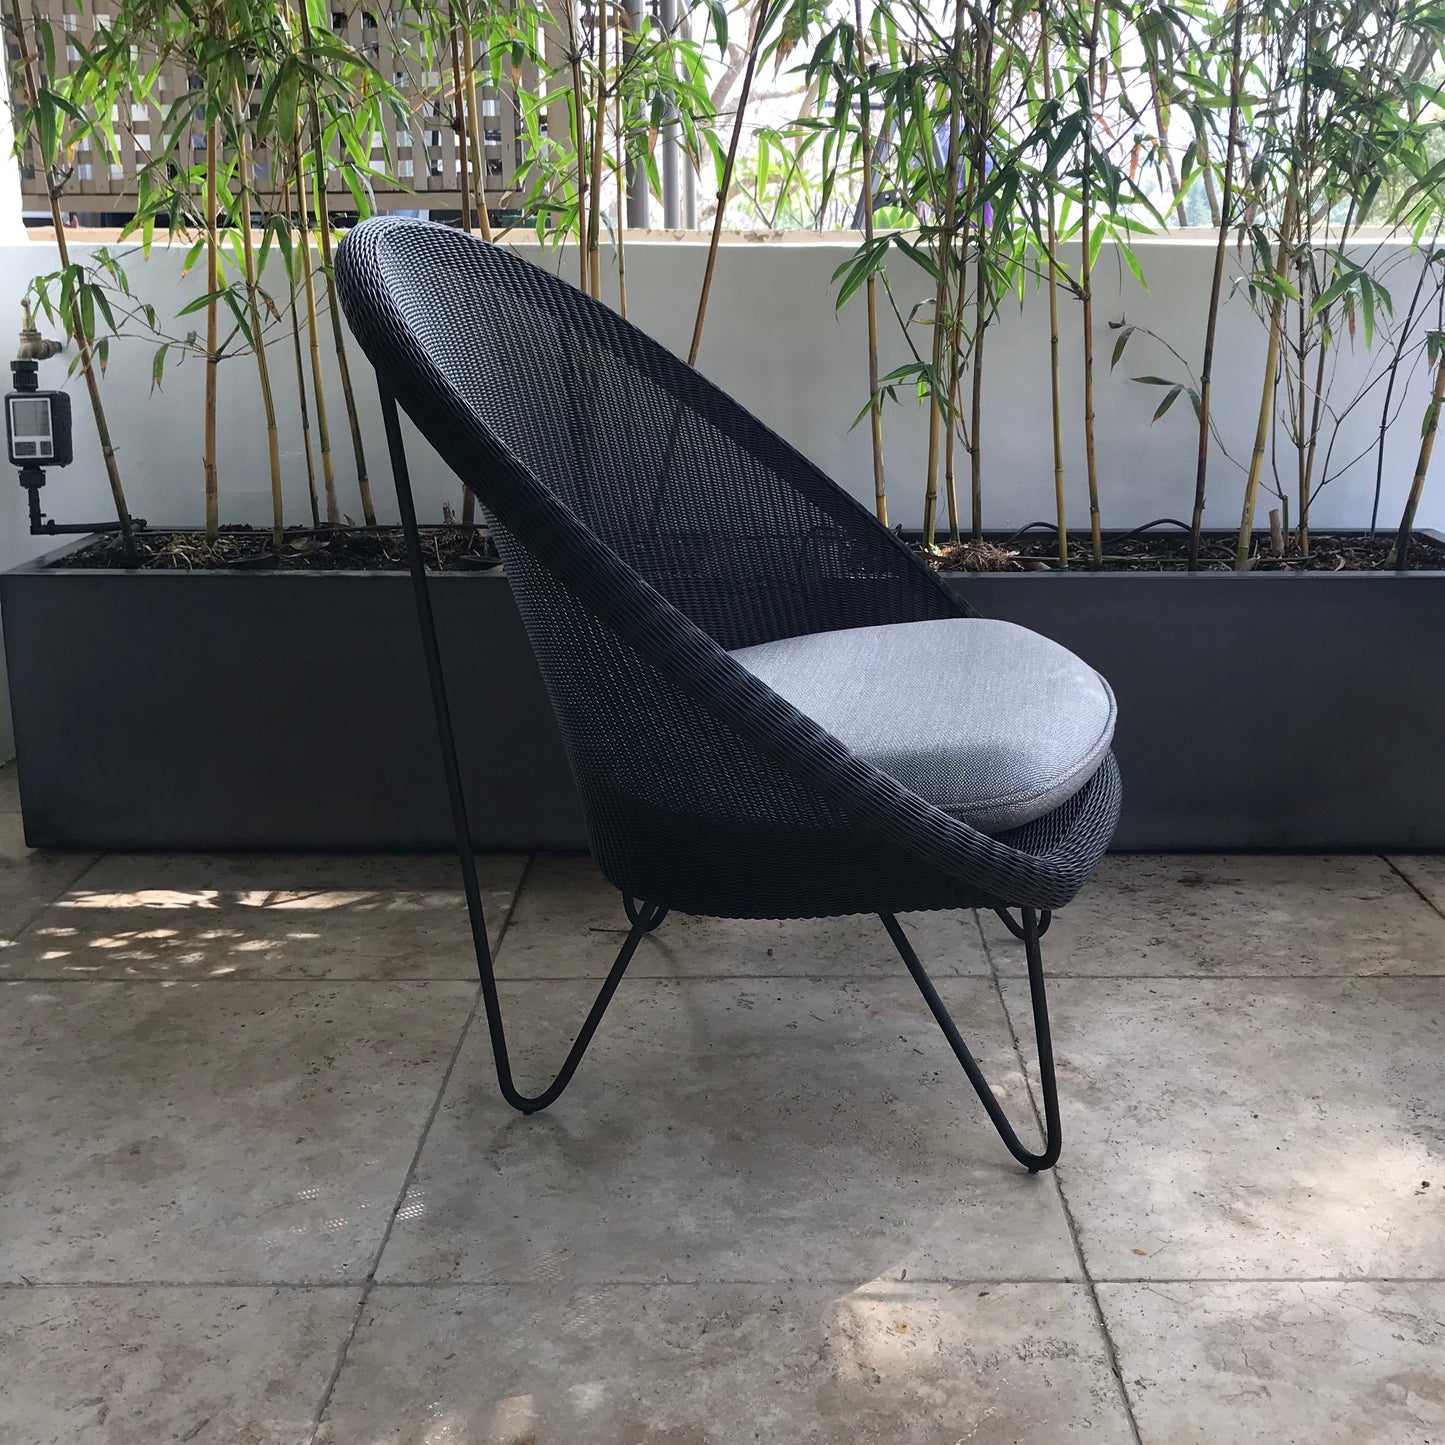 Gipsy Cocoon Chair by Vincent Sheppard through Cotswald (2 available)